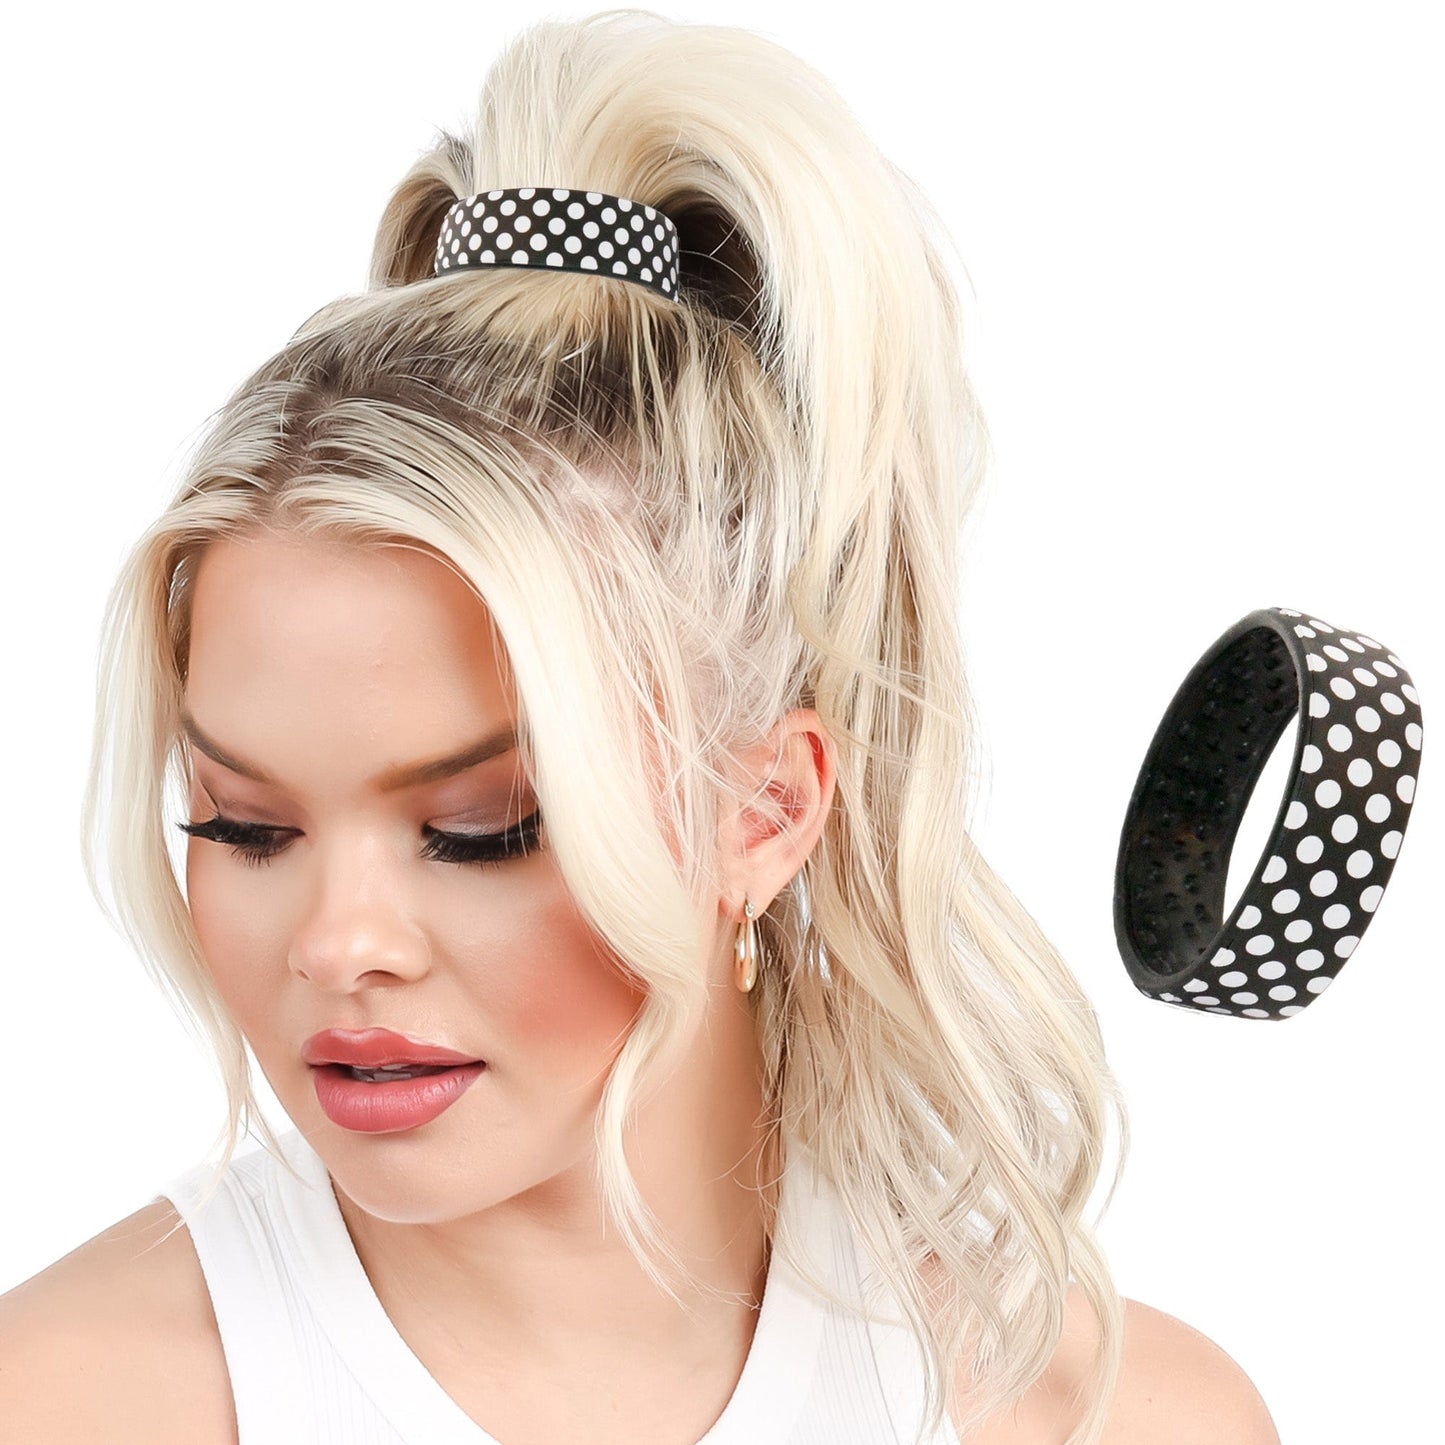 Polka Dot Limited Edition Designer PONY-O. This larger size is perfect for ponytails and all-up styles.